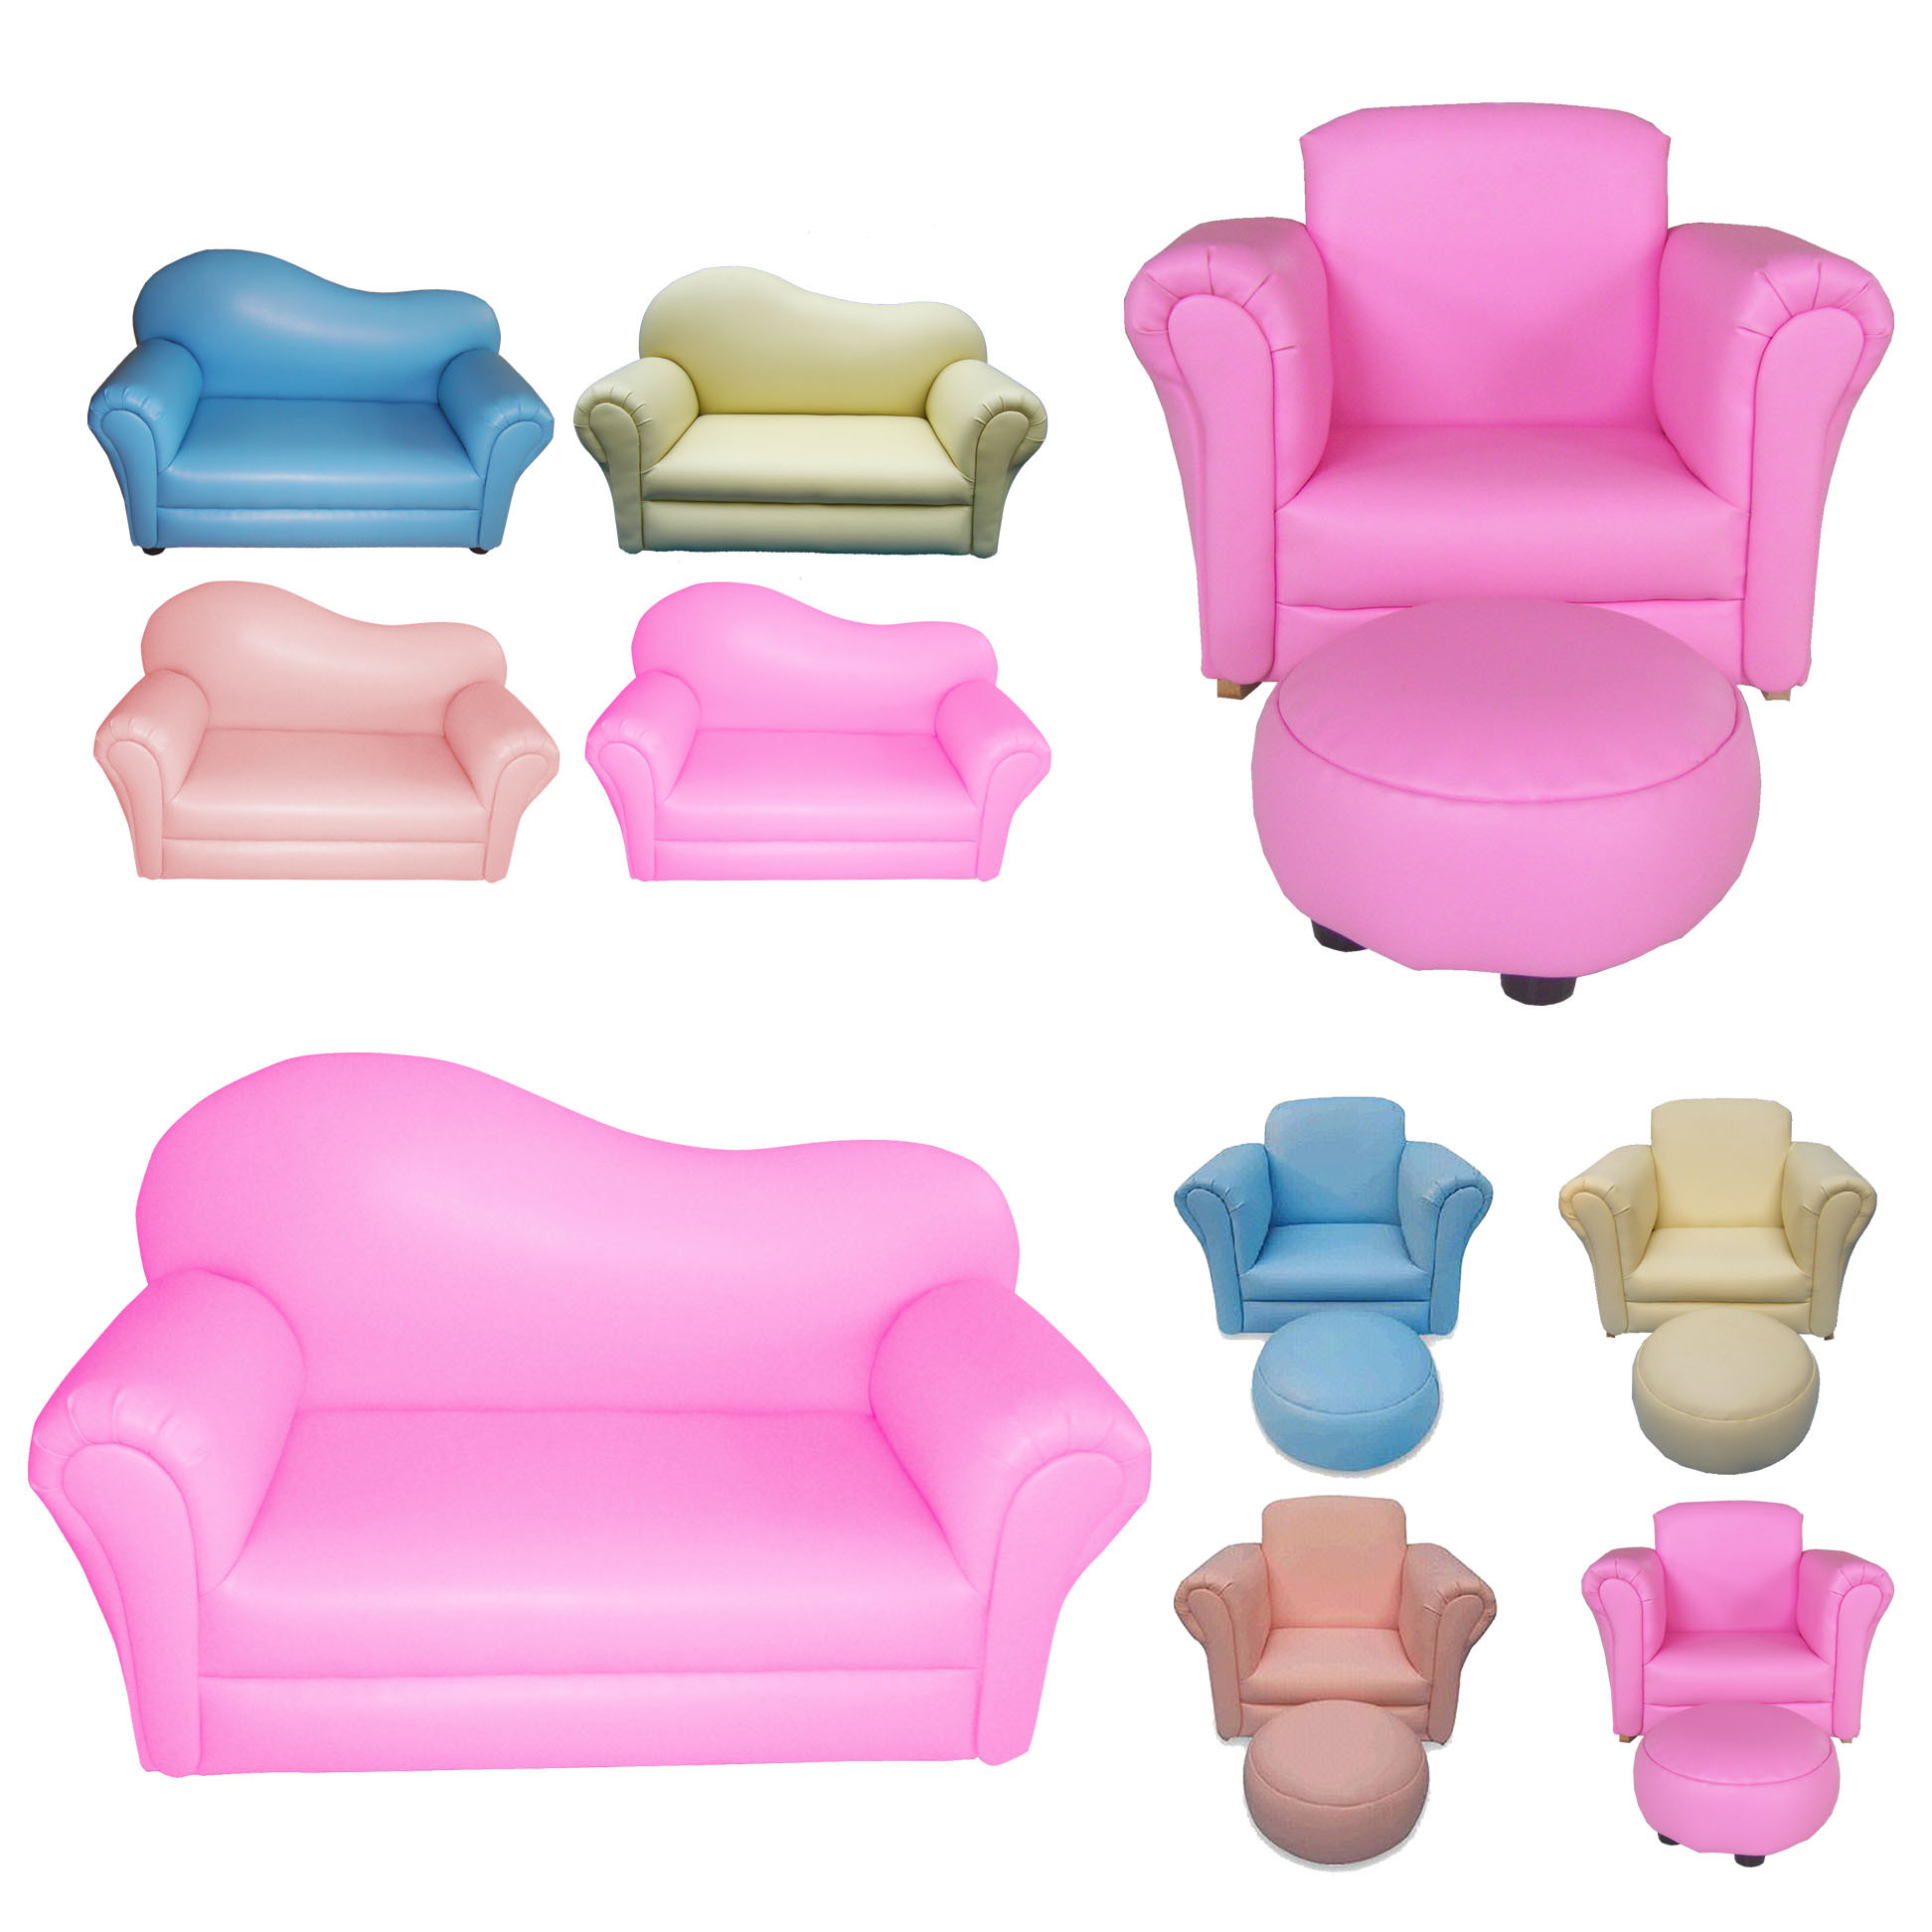 Kids Sofa And Chair
 Children Kids Child Sofa Furniture Armchair Couch Seat